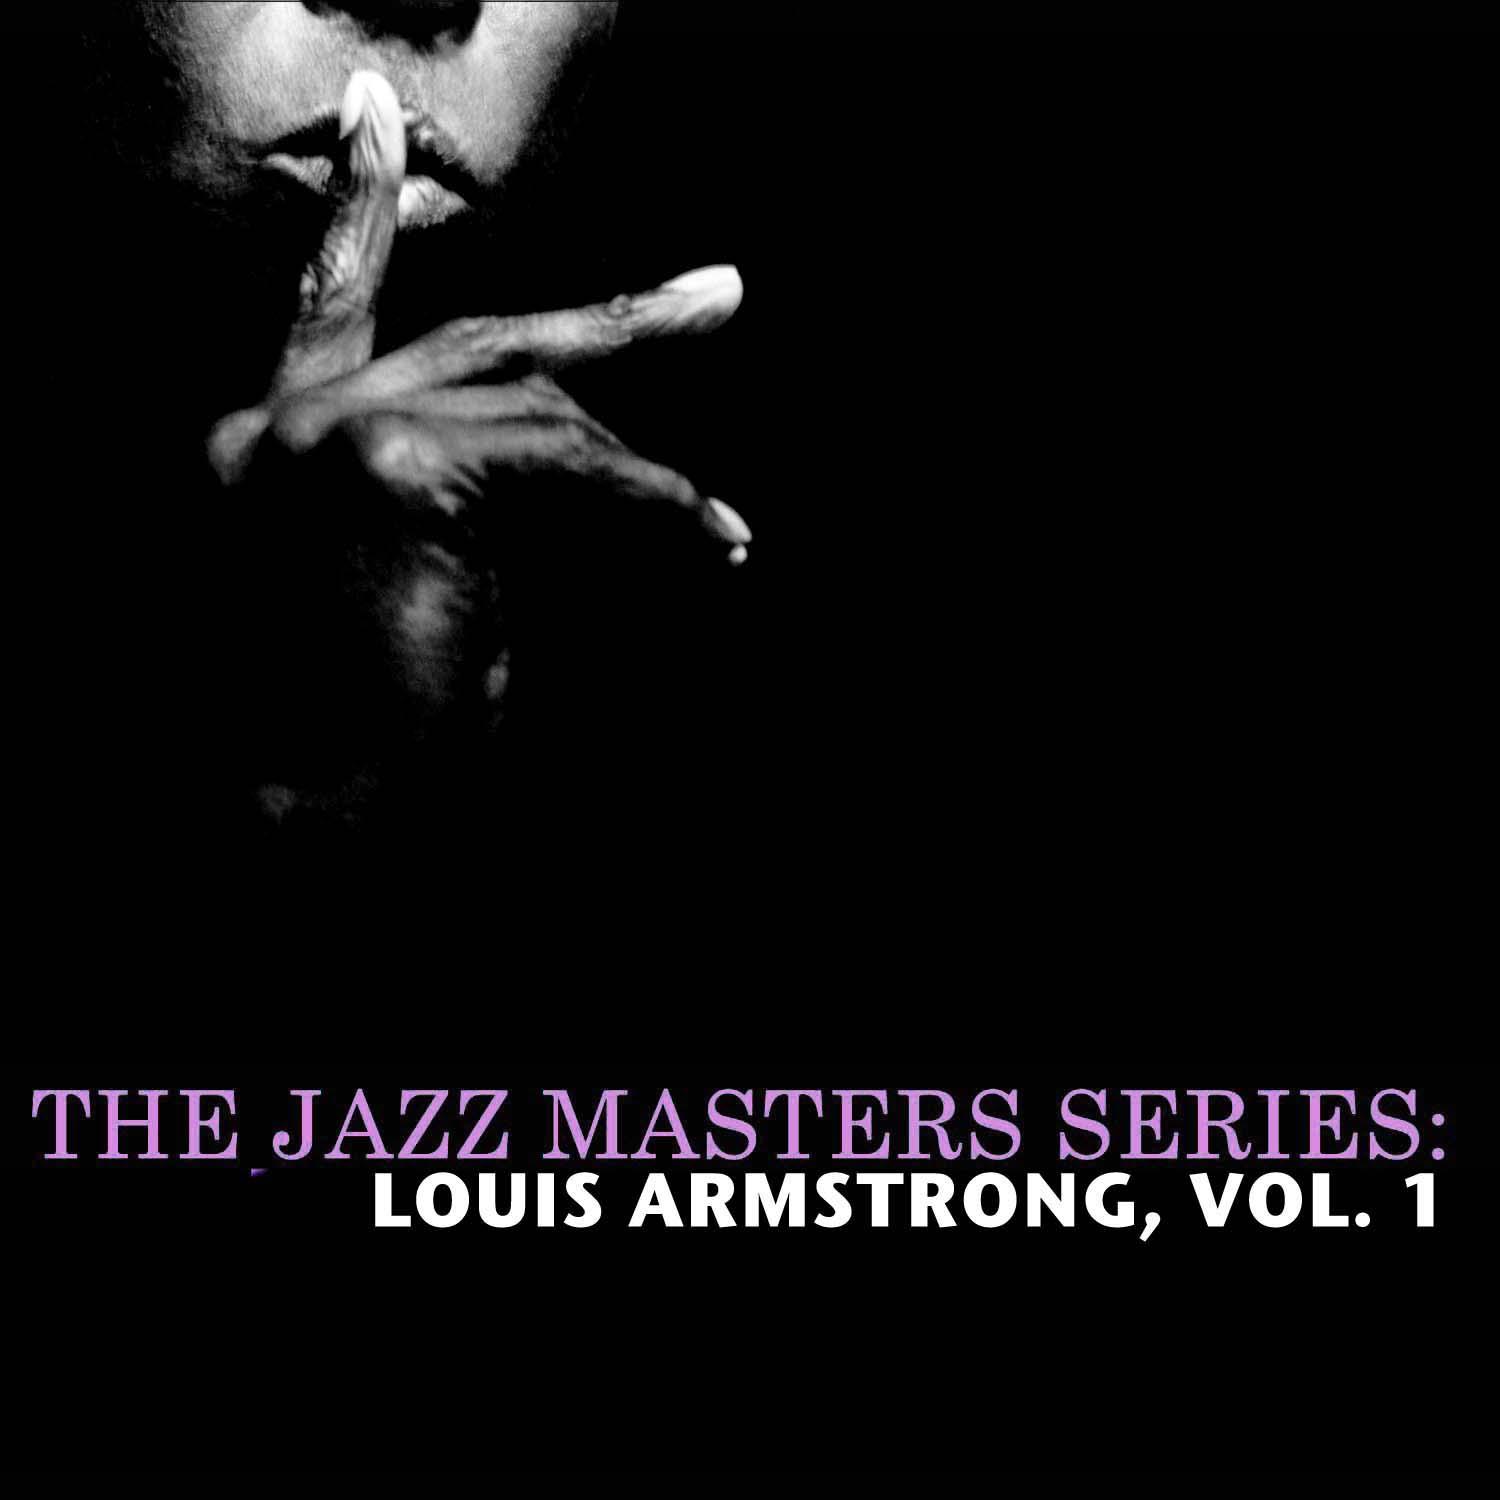 The Jazz Masters Series: Louis Armstrong, Vol. 1